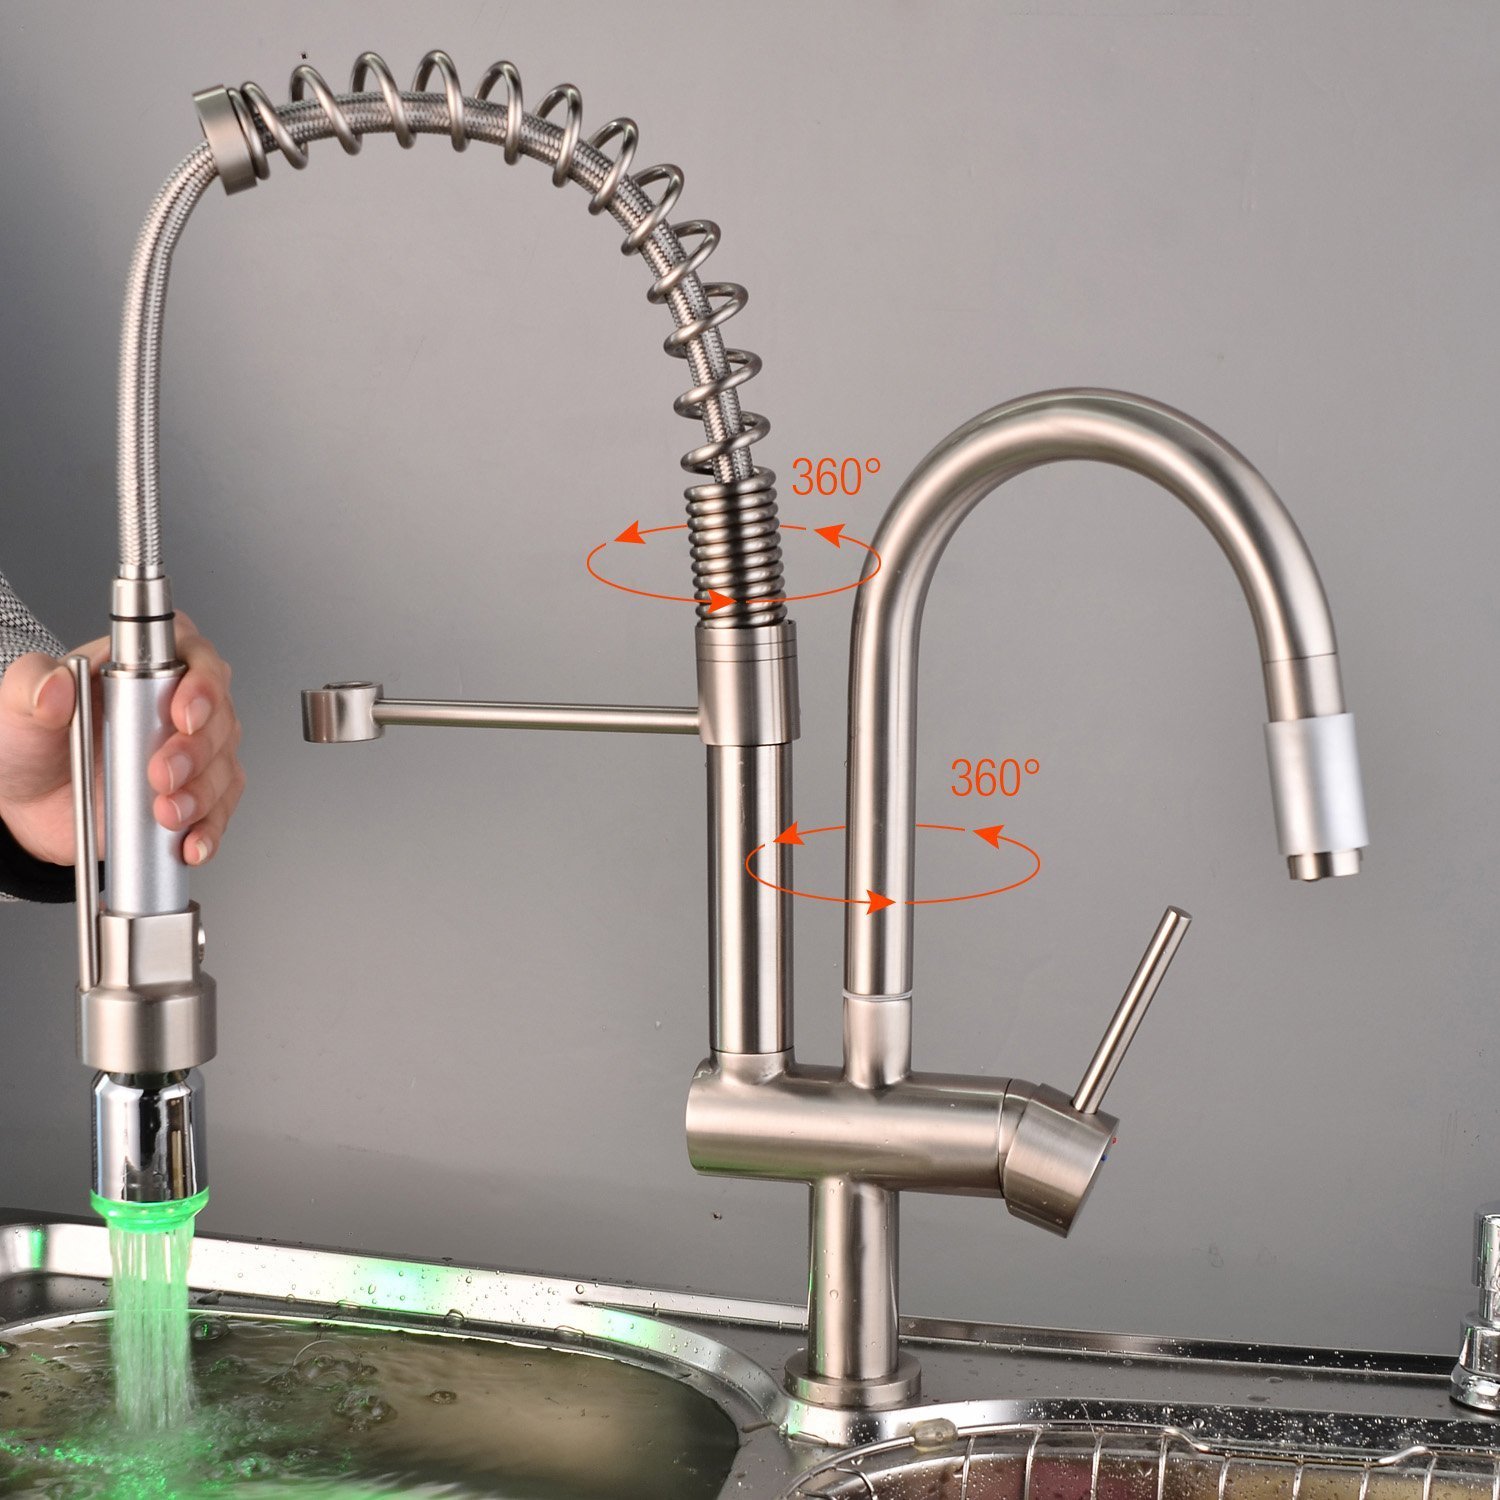 Napoli Brushed Nickel Kitchen Sink Faucet with Pull Down Spray